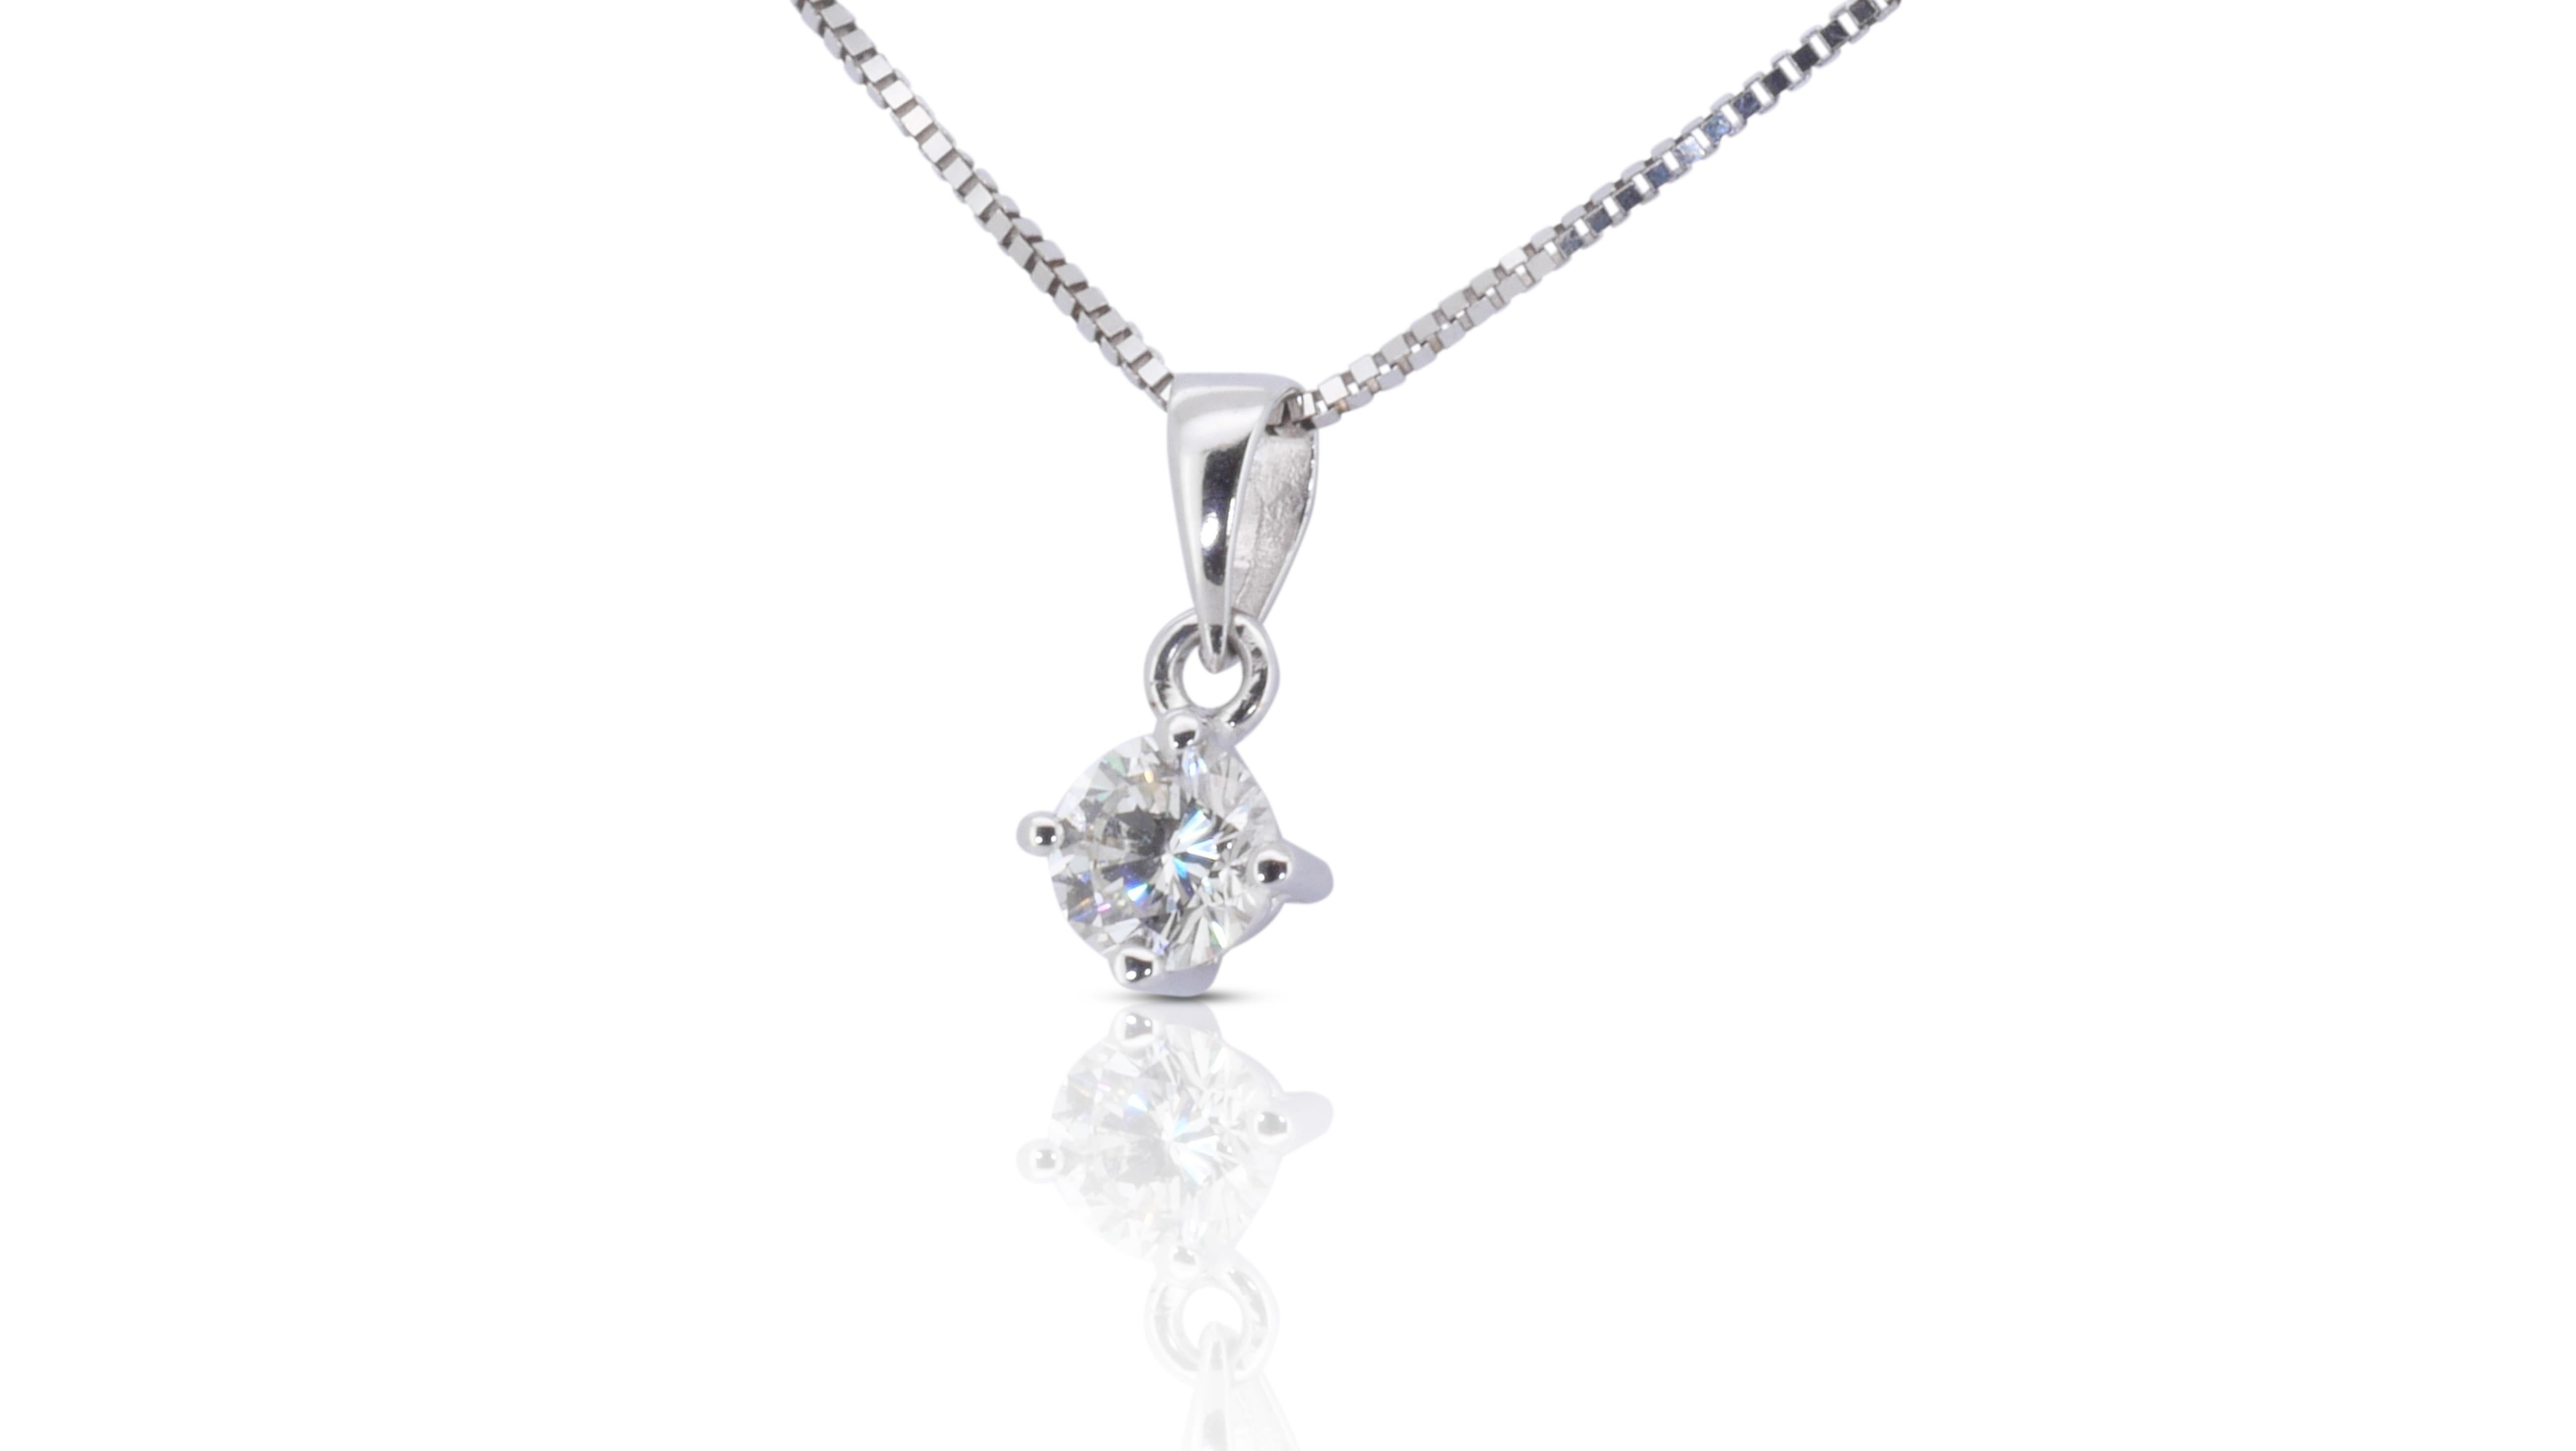 A beautiful pendant with a dazzling 0.19 carat round brilliant diamonds. The jewelry is made of 18K white gold with a high quality polish. It comes with a nice jewelry box.

1 diamond main stone of 0.19 carat
cut: round brilliant
color: G
clarity: